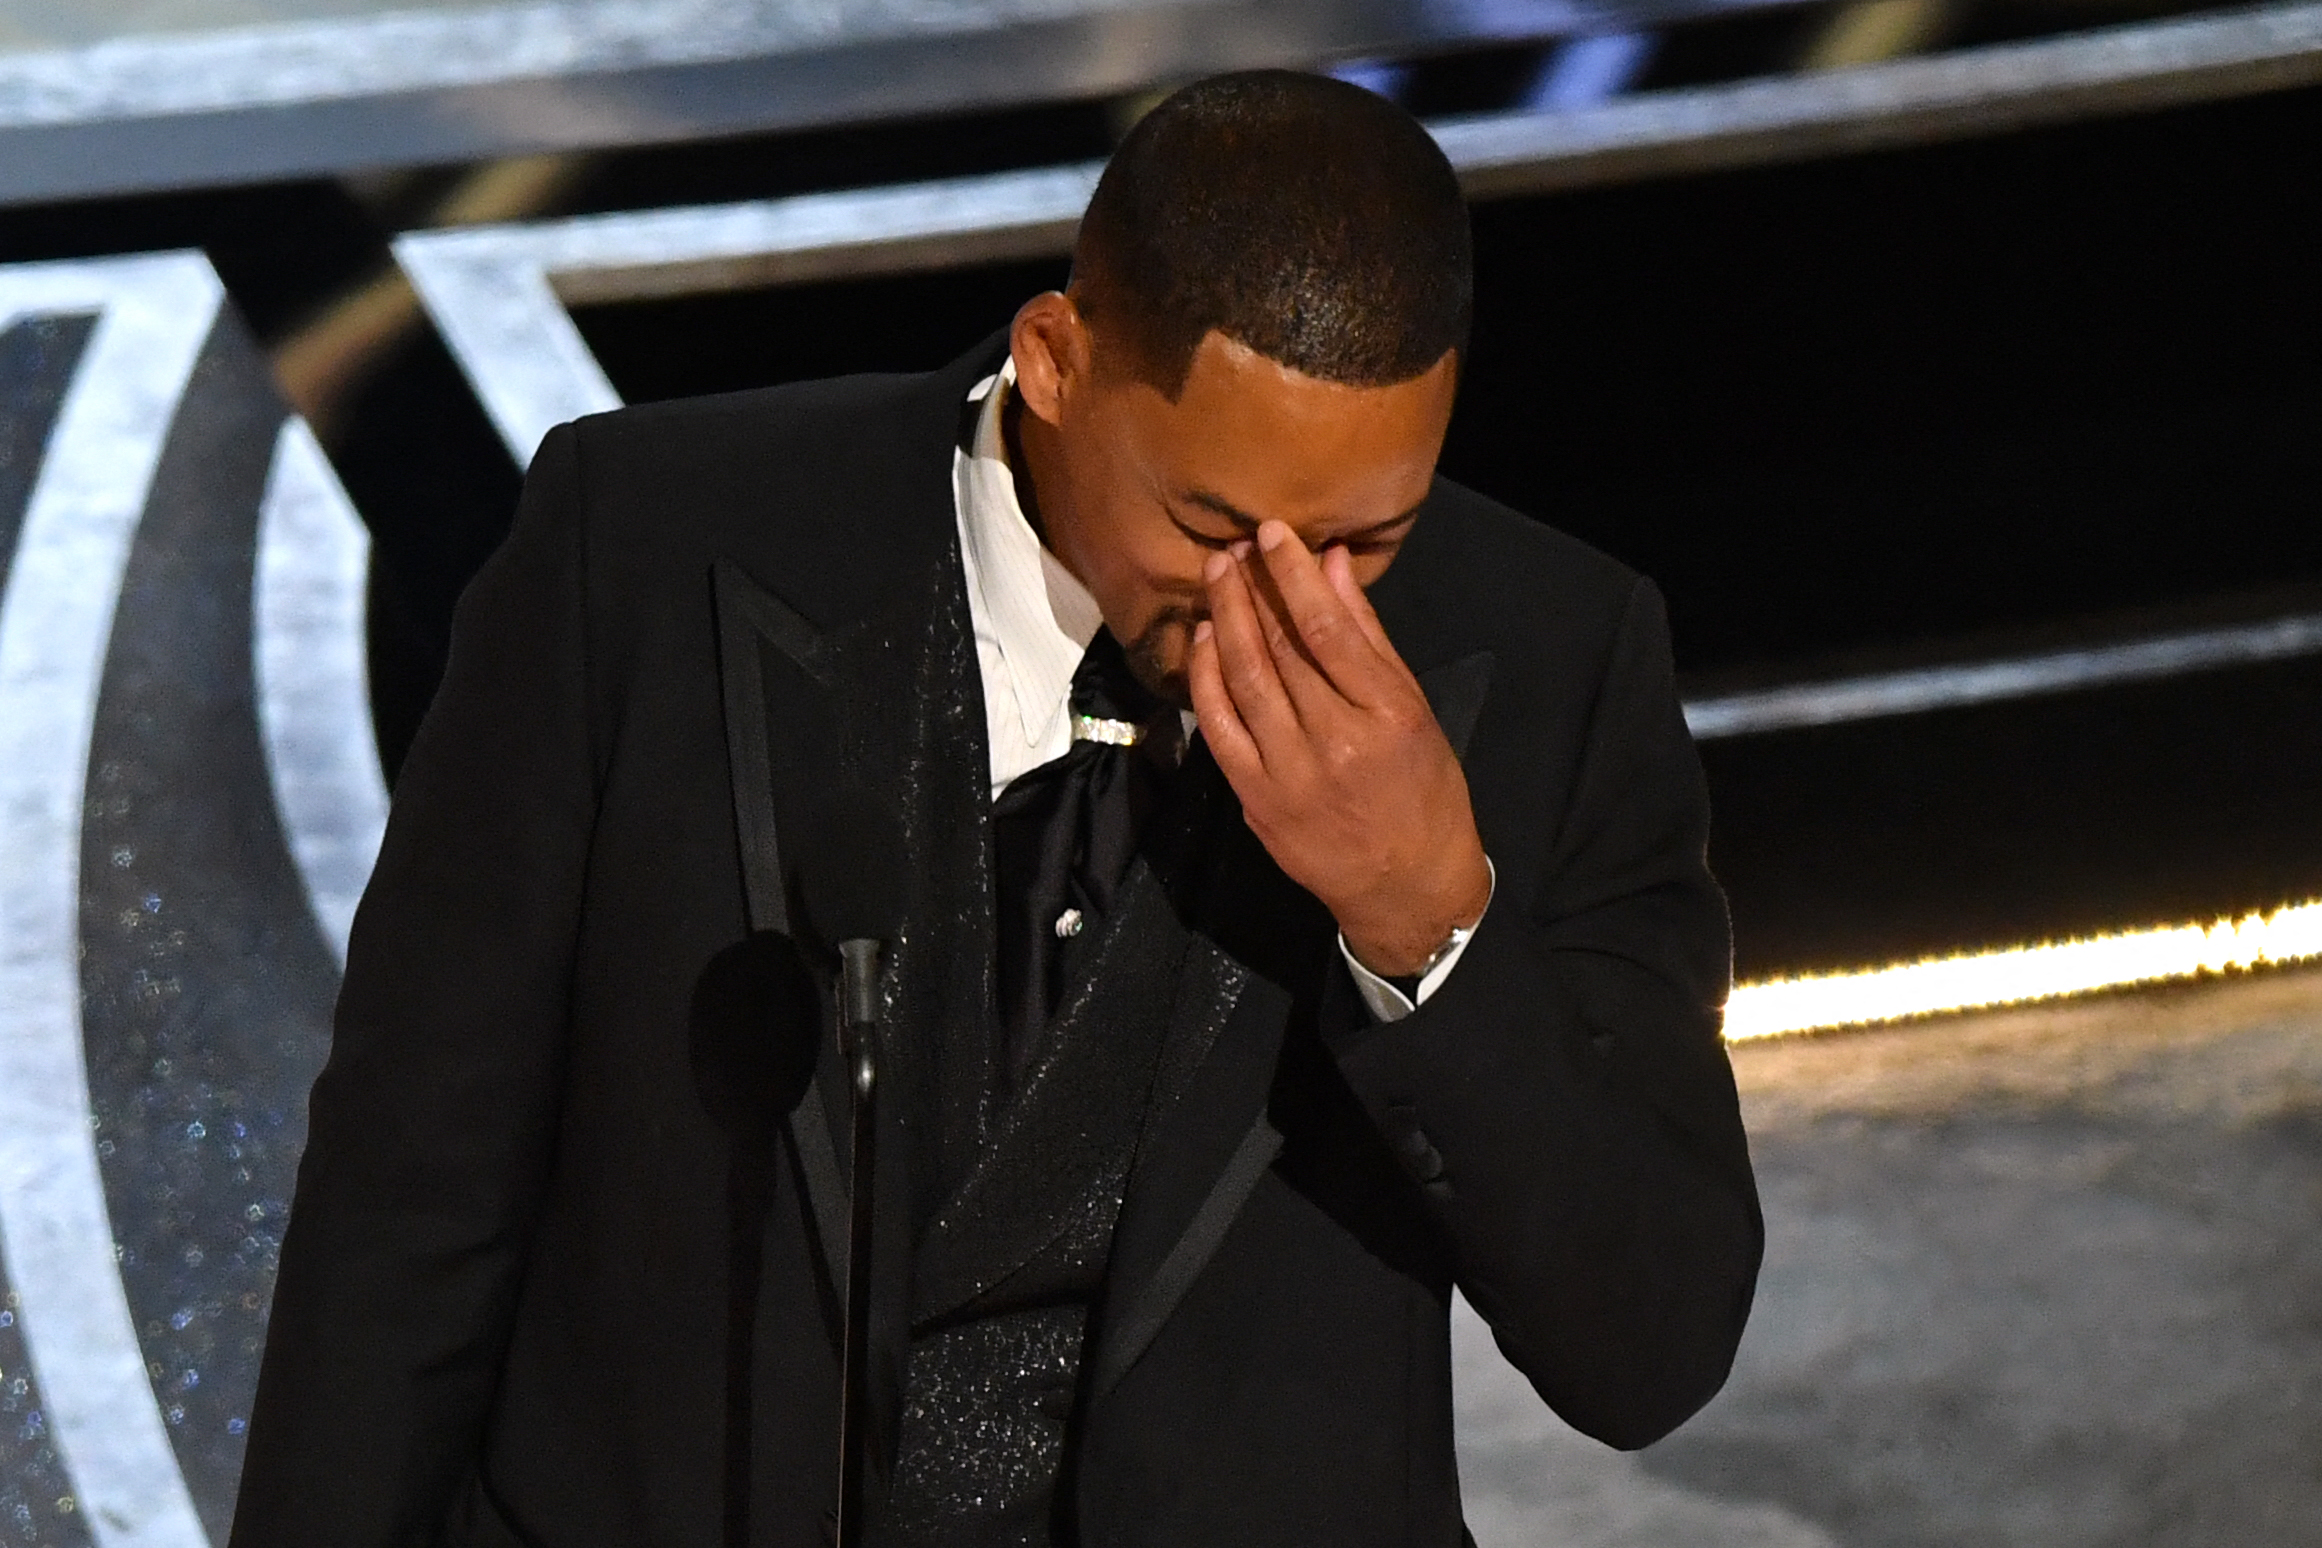 Will Smith accepts the award for Best Actor in a Leading Role for "King Richard" onstage during the 94th Oscars in Hollywood, California on March 27, 2022. (Photo by Robyn Beck / AFP) (Photo by ROBYN BECK/AFP via Getty Images